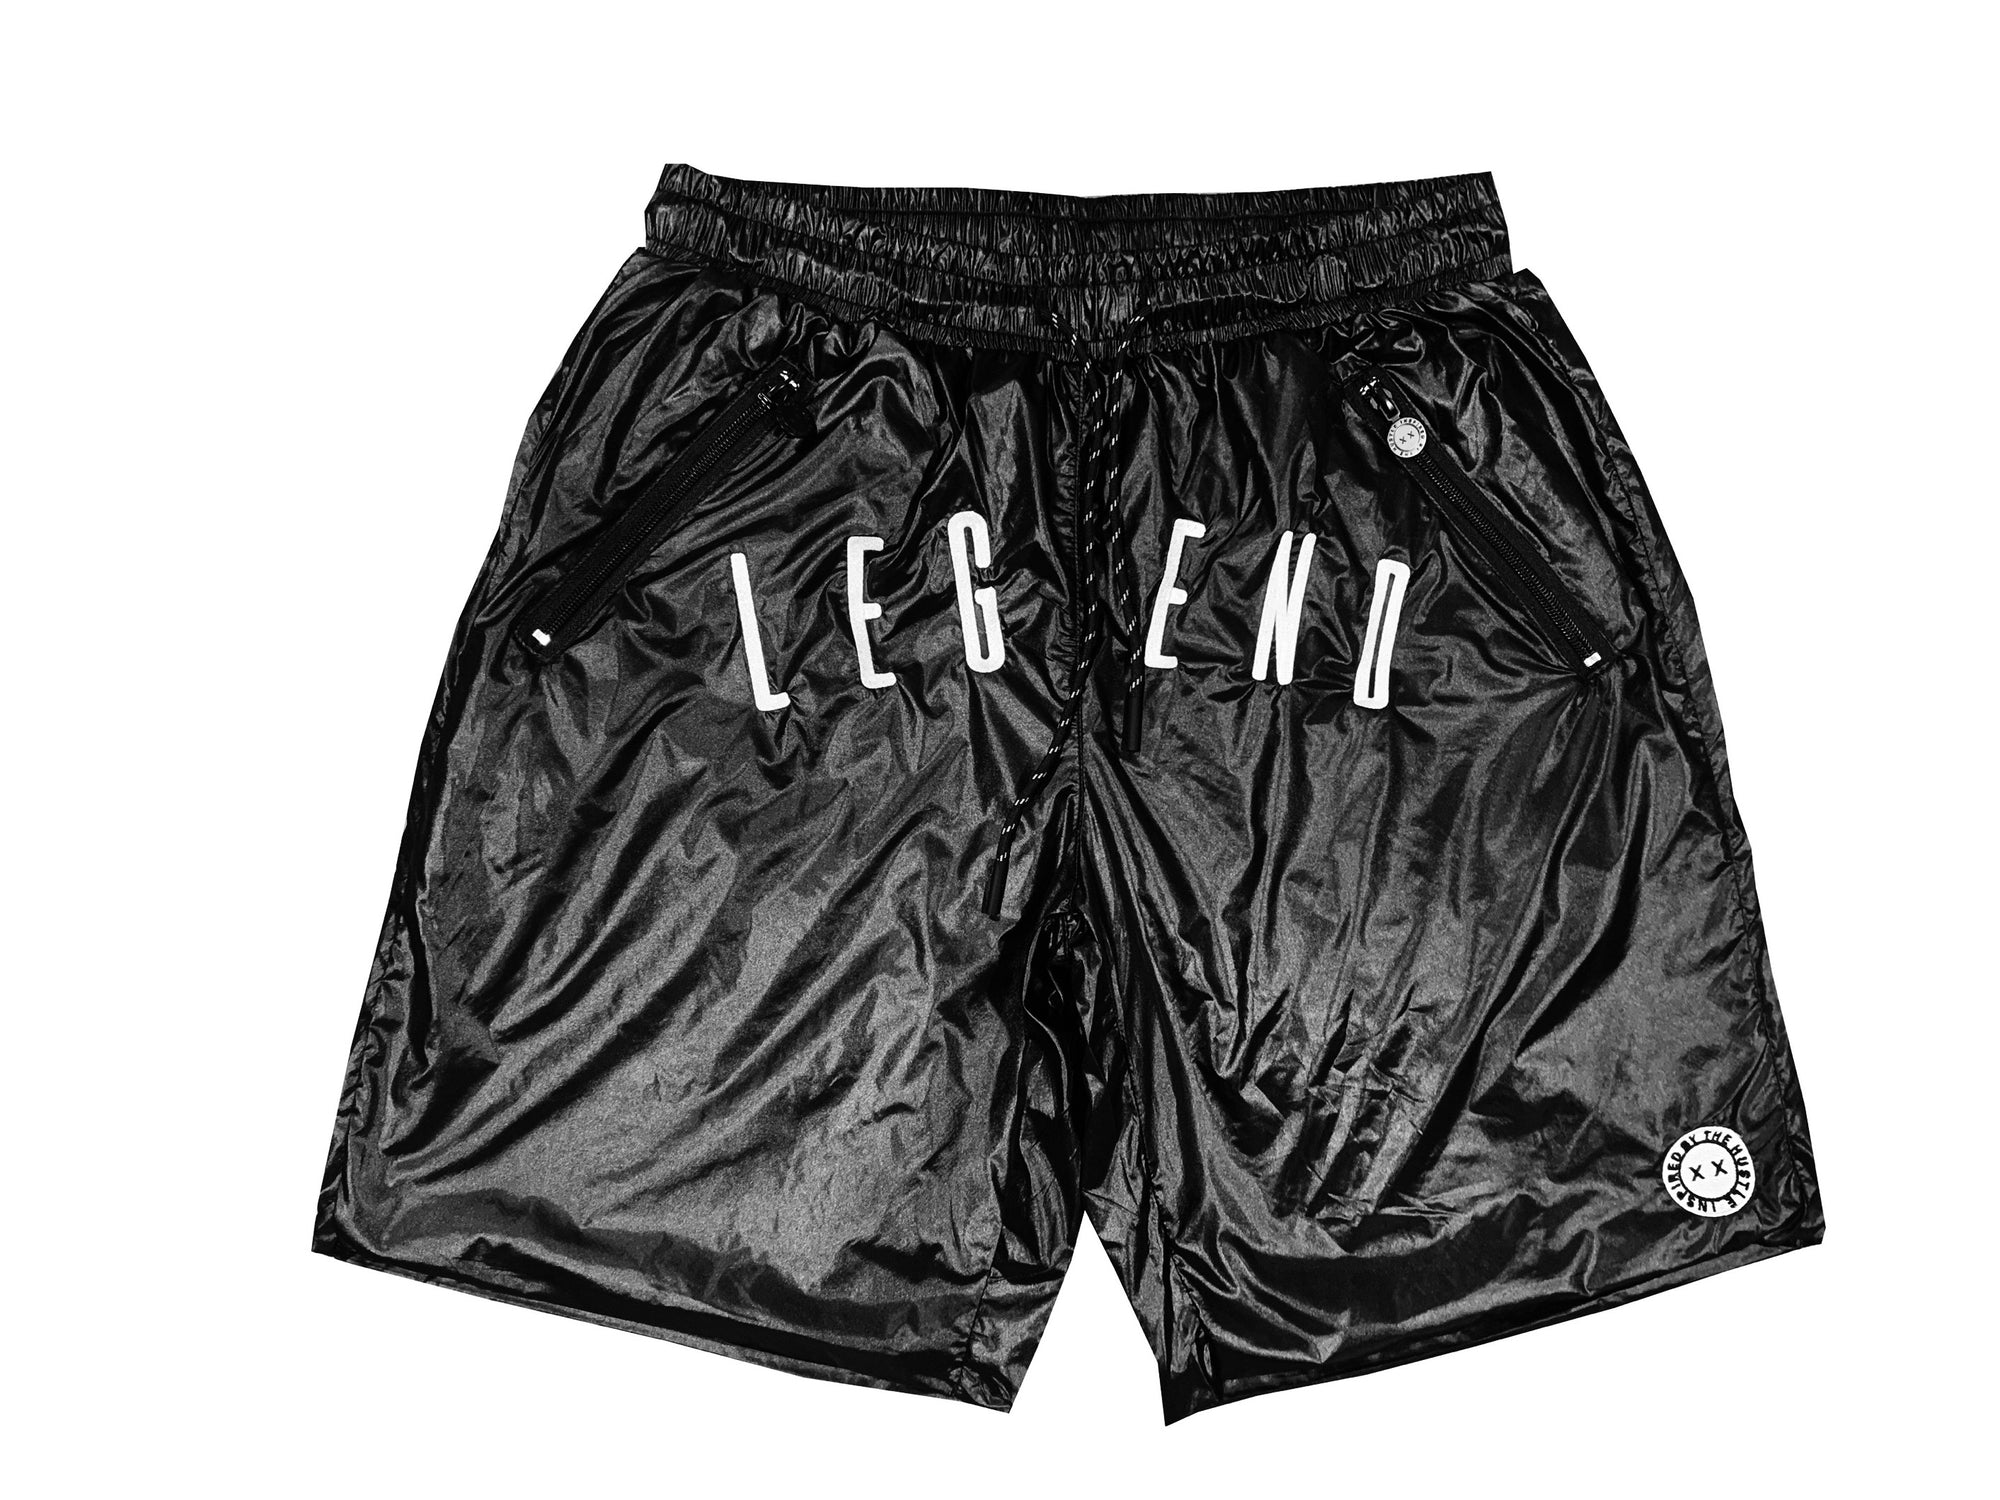 Legends Embroidered Shorts Black/White